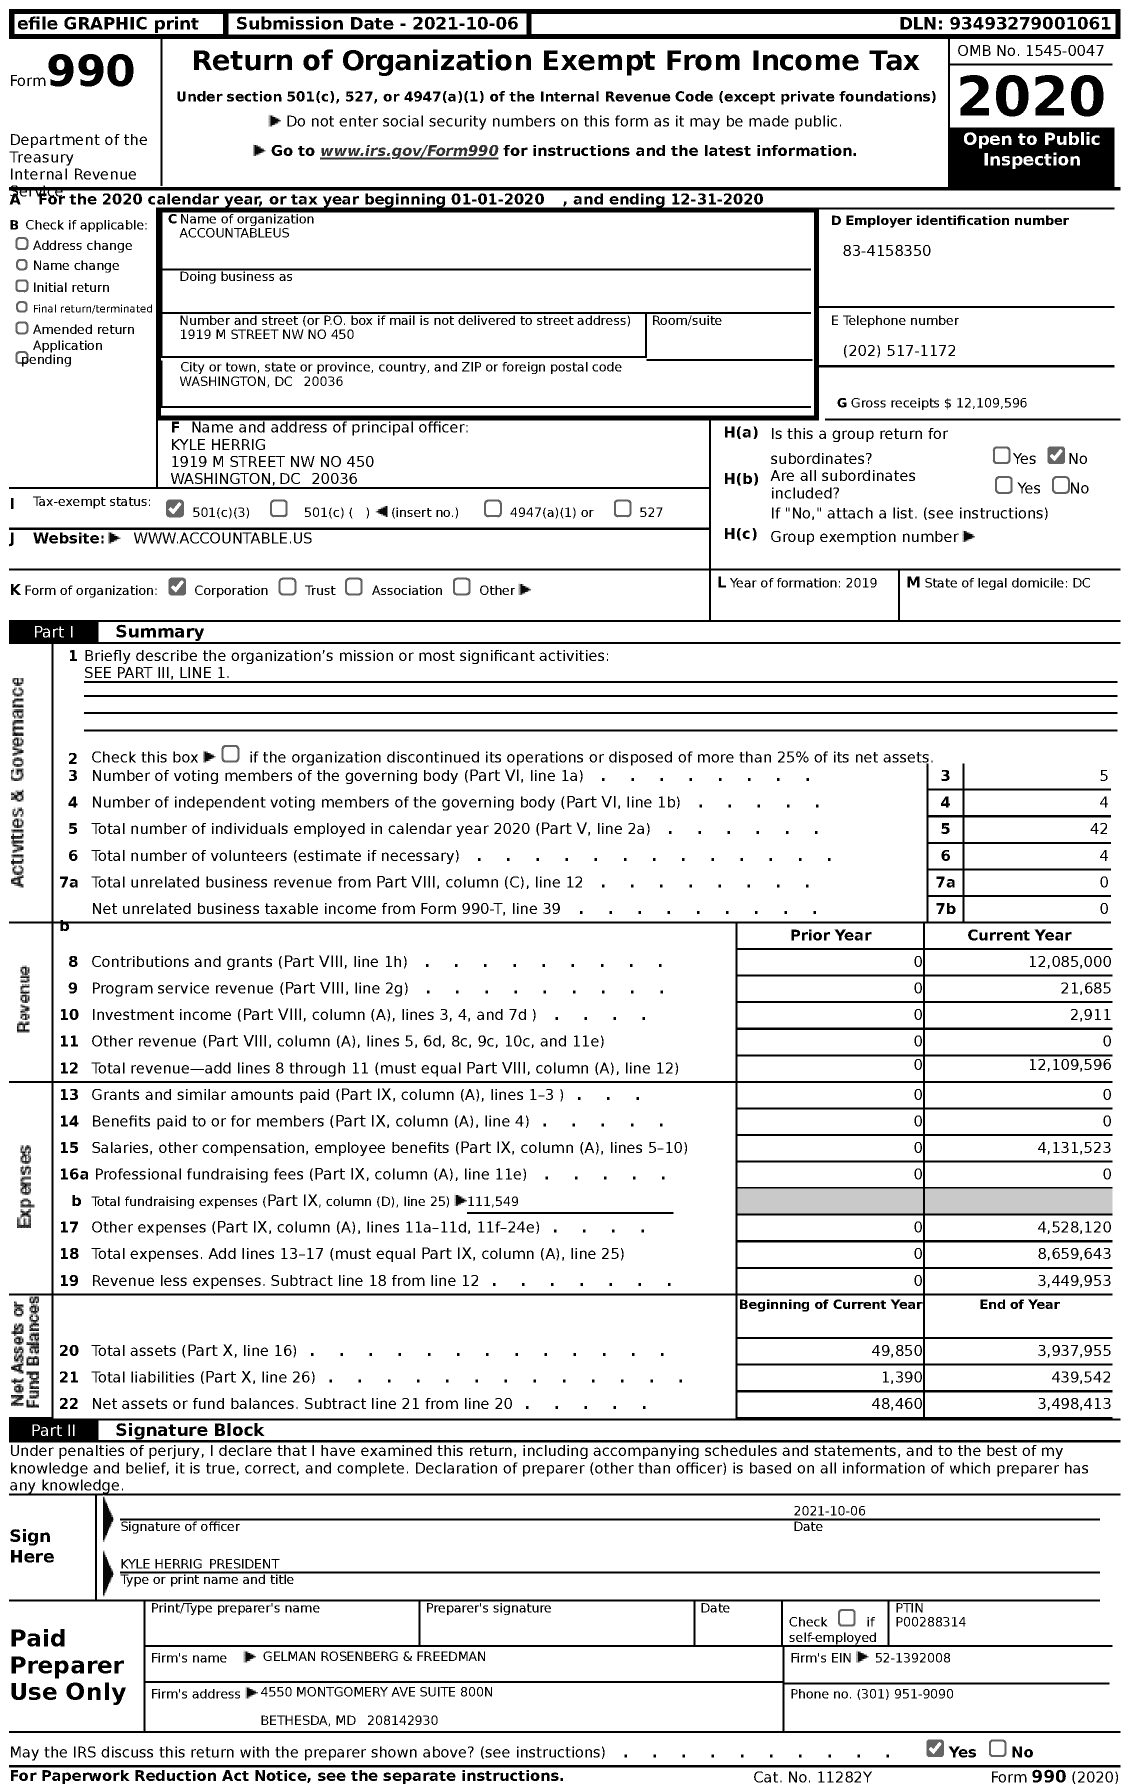 Image of first page of 2020 Form 990 for Accountableus